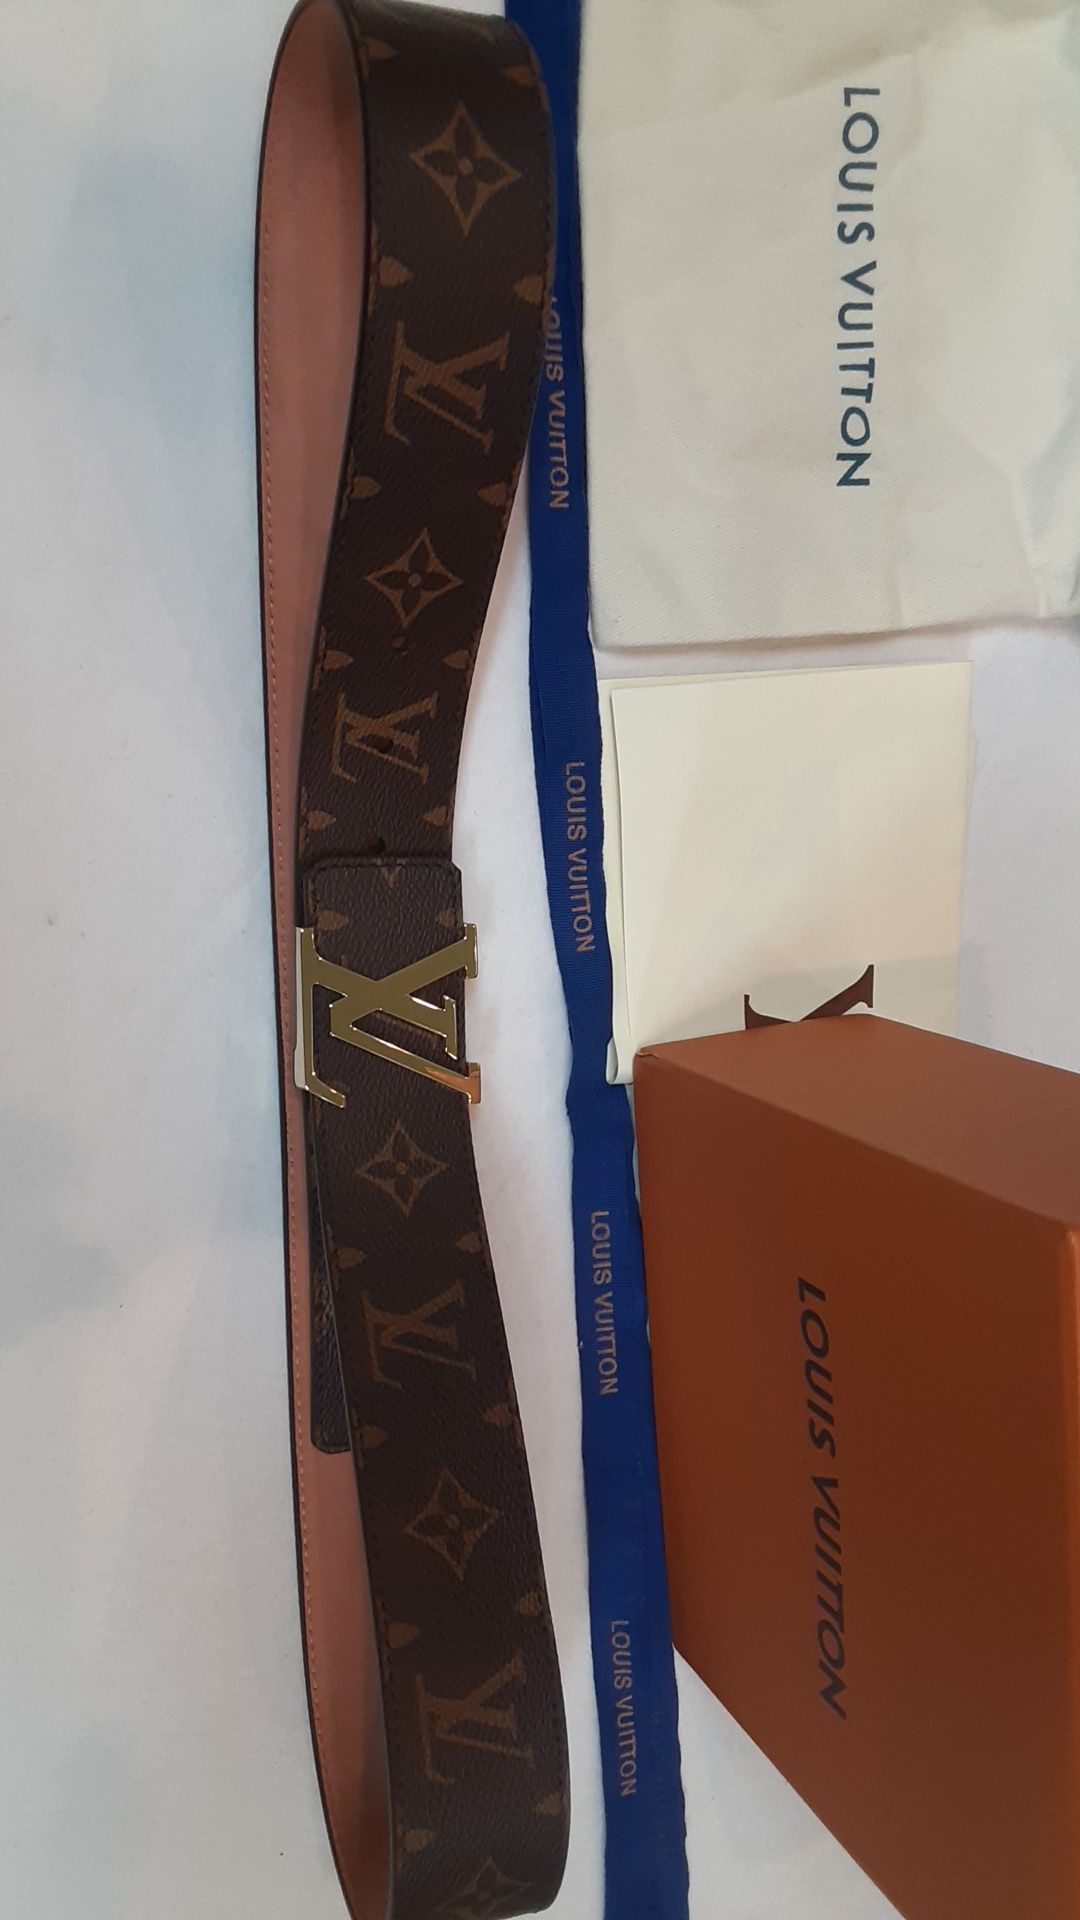 Authentic Louis Vuitton Brown / Black Reversible Monogram Leather Belt Size  90/36 Brand New With Tags for Sale in Garden City South, NY - OfferUp